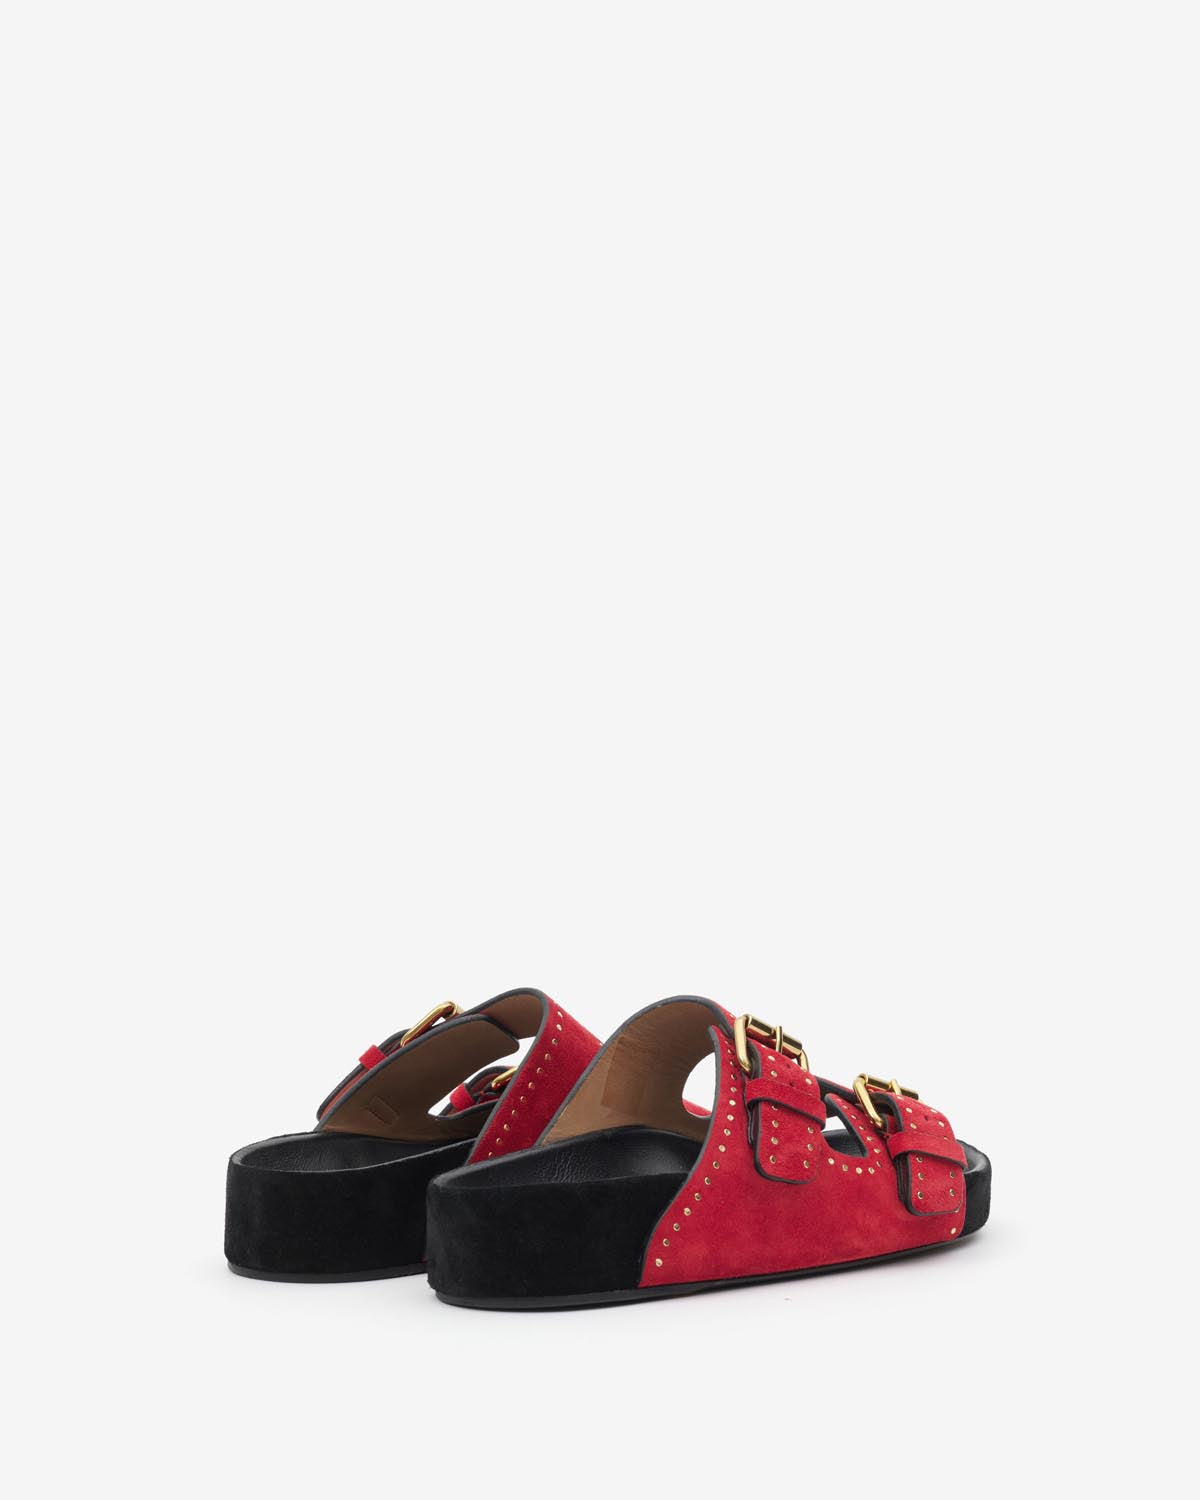 Lennyo sandals Woman Scarlet red 2